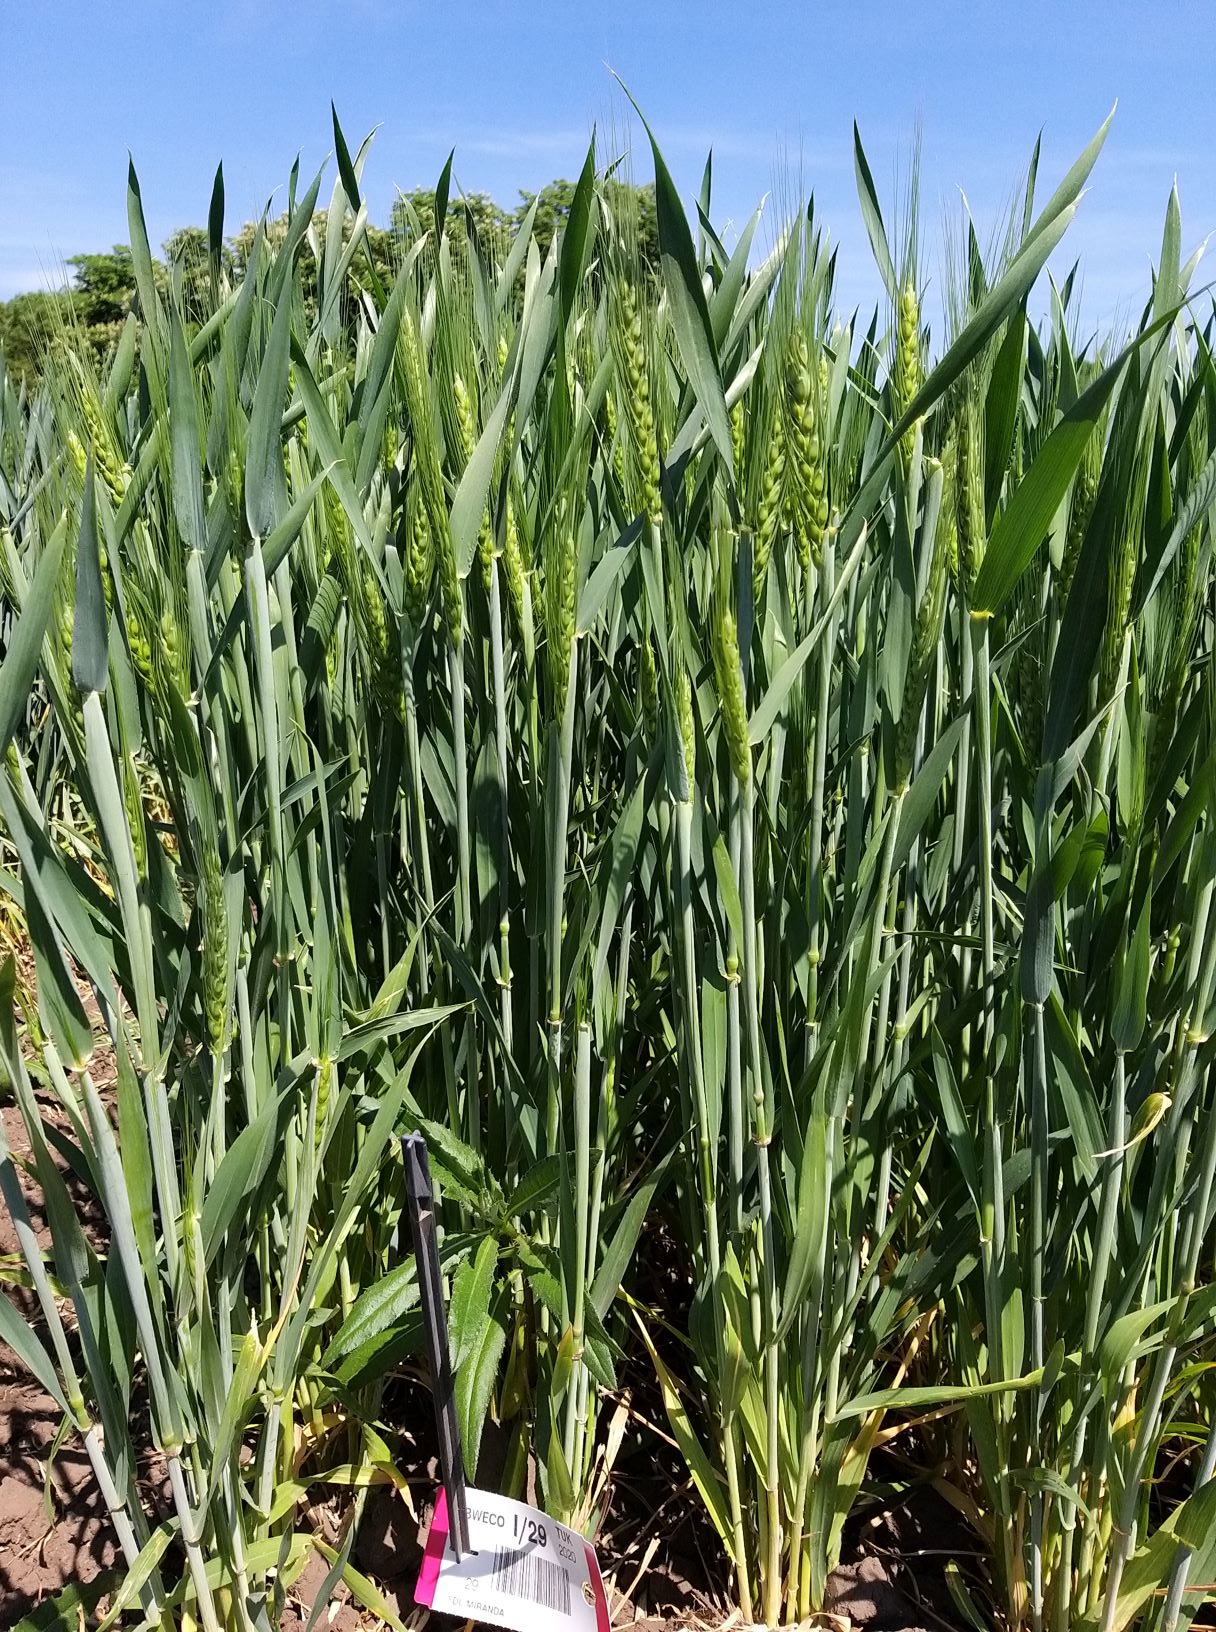 Wheat trials in Hungary